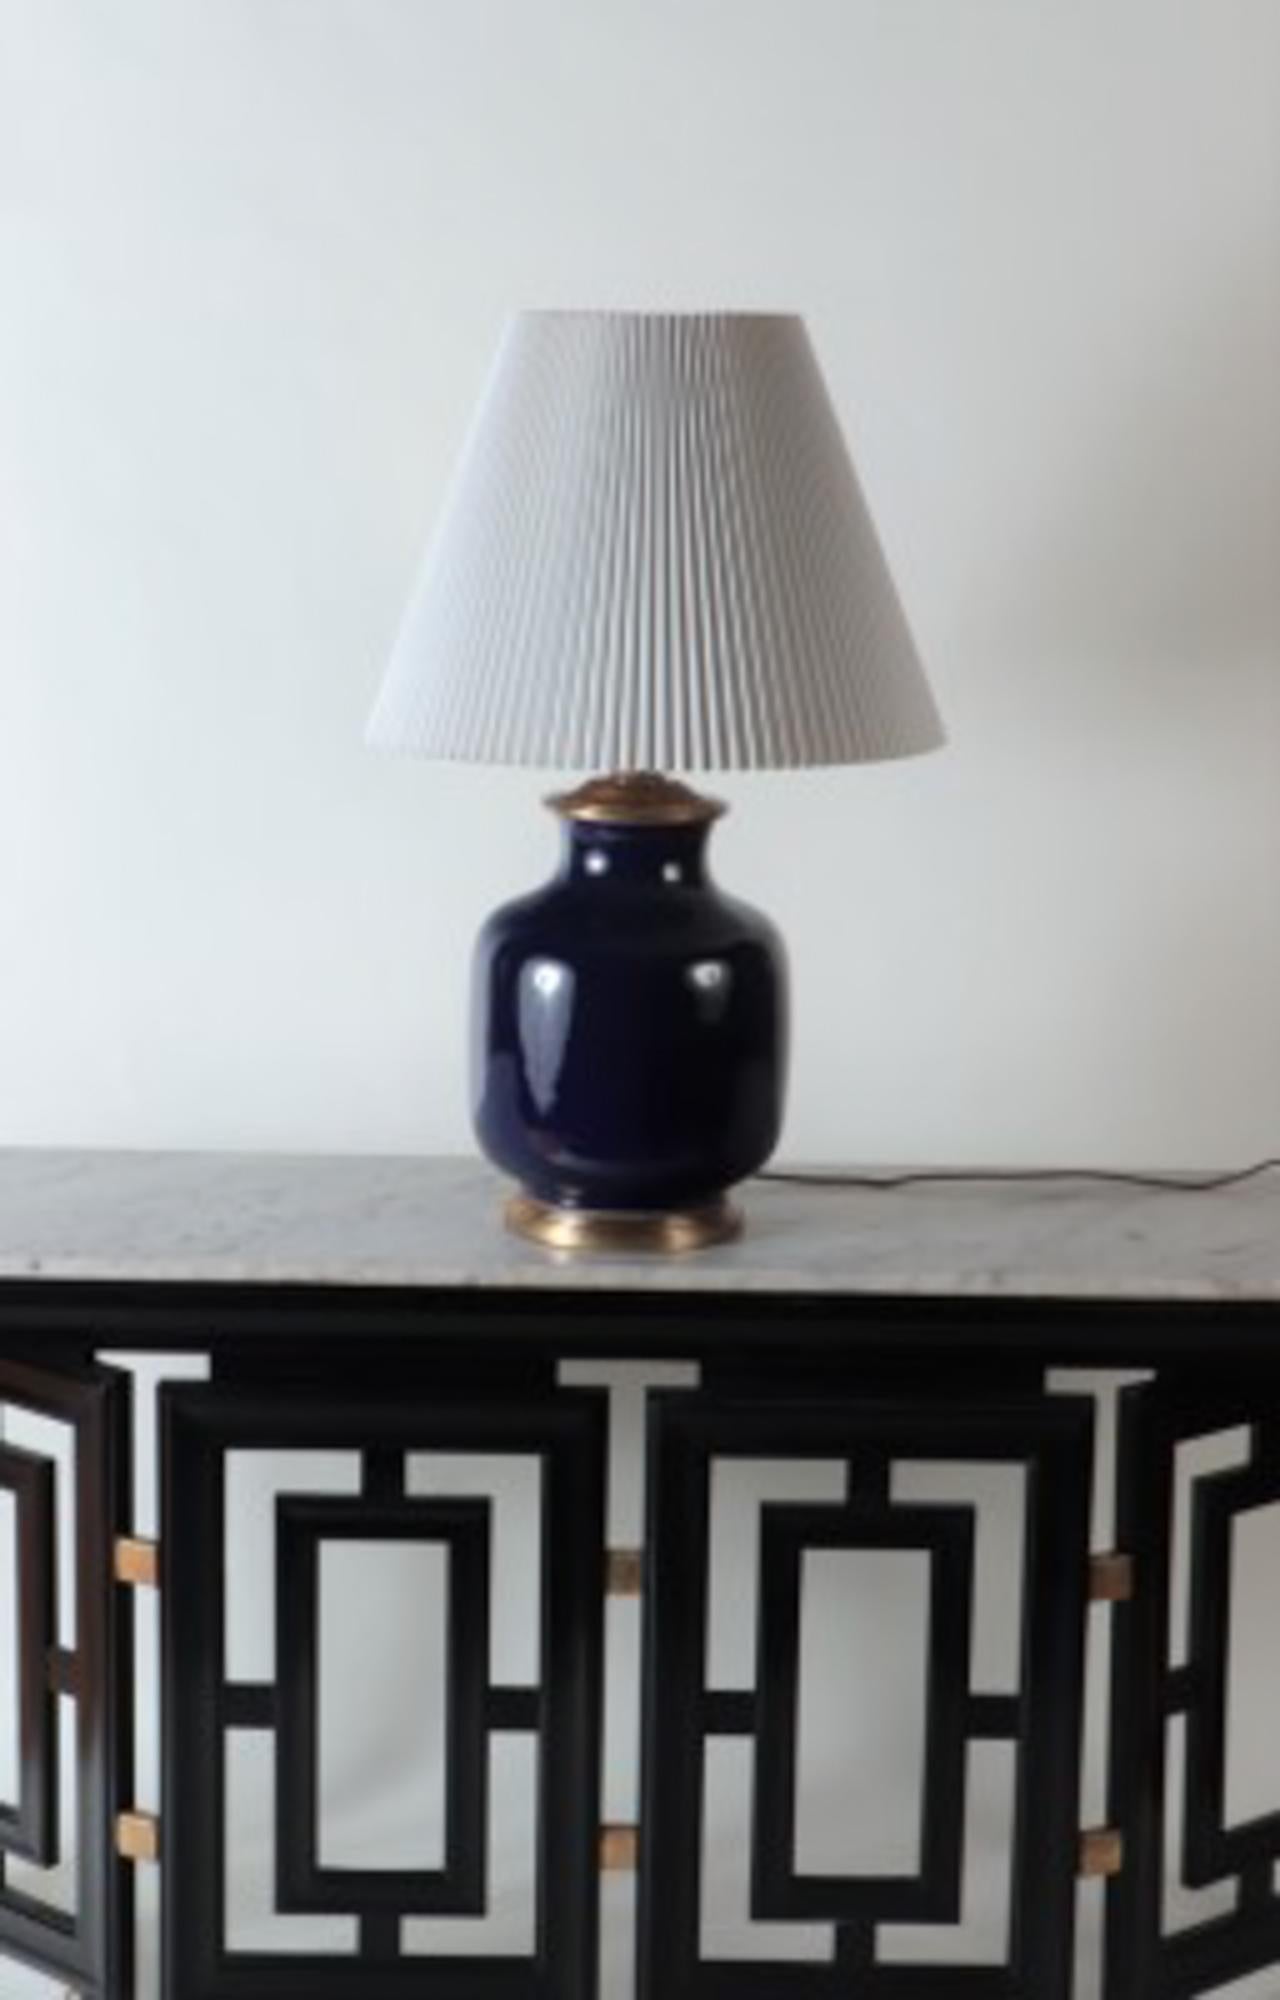 A large, single blue porcelain table lamp of baluster form, with gilt base. Antiqued finish hardware includes double sockets with on/off pull chains, and brown cloth covered cord.